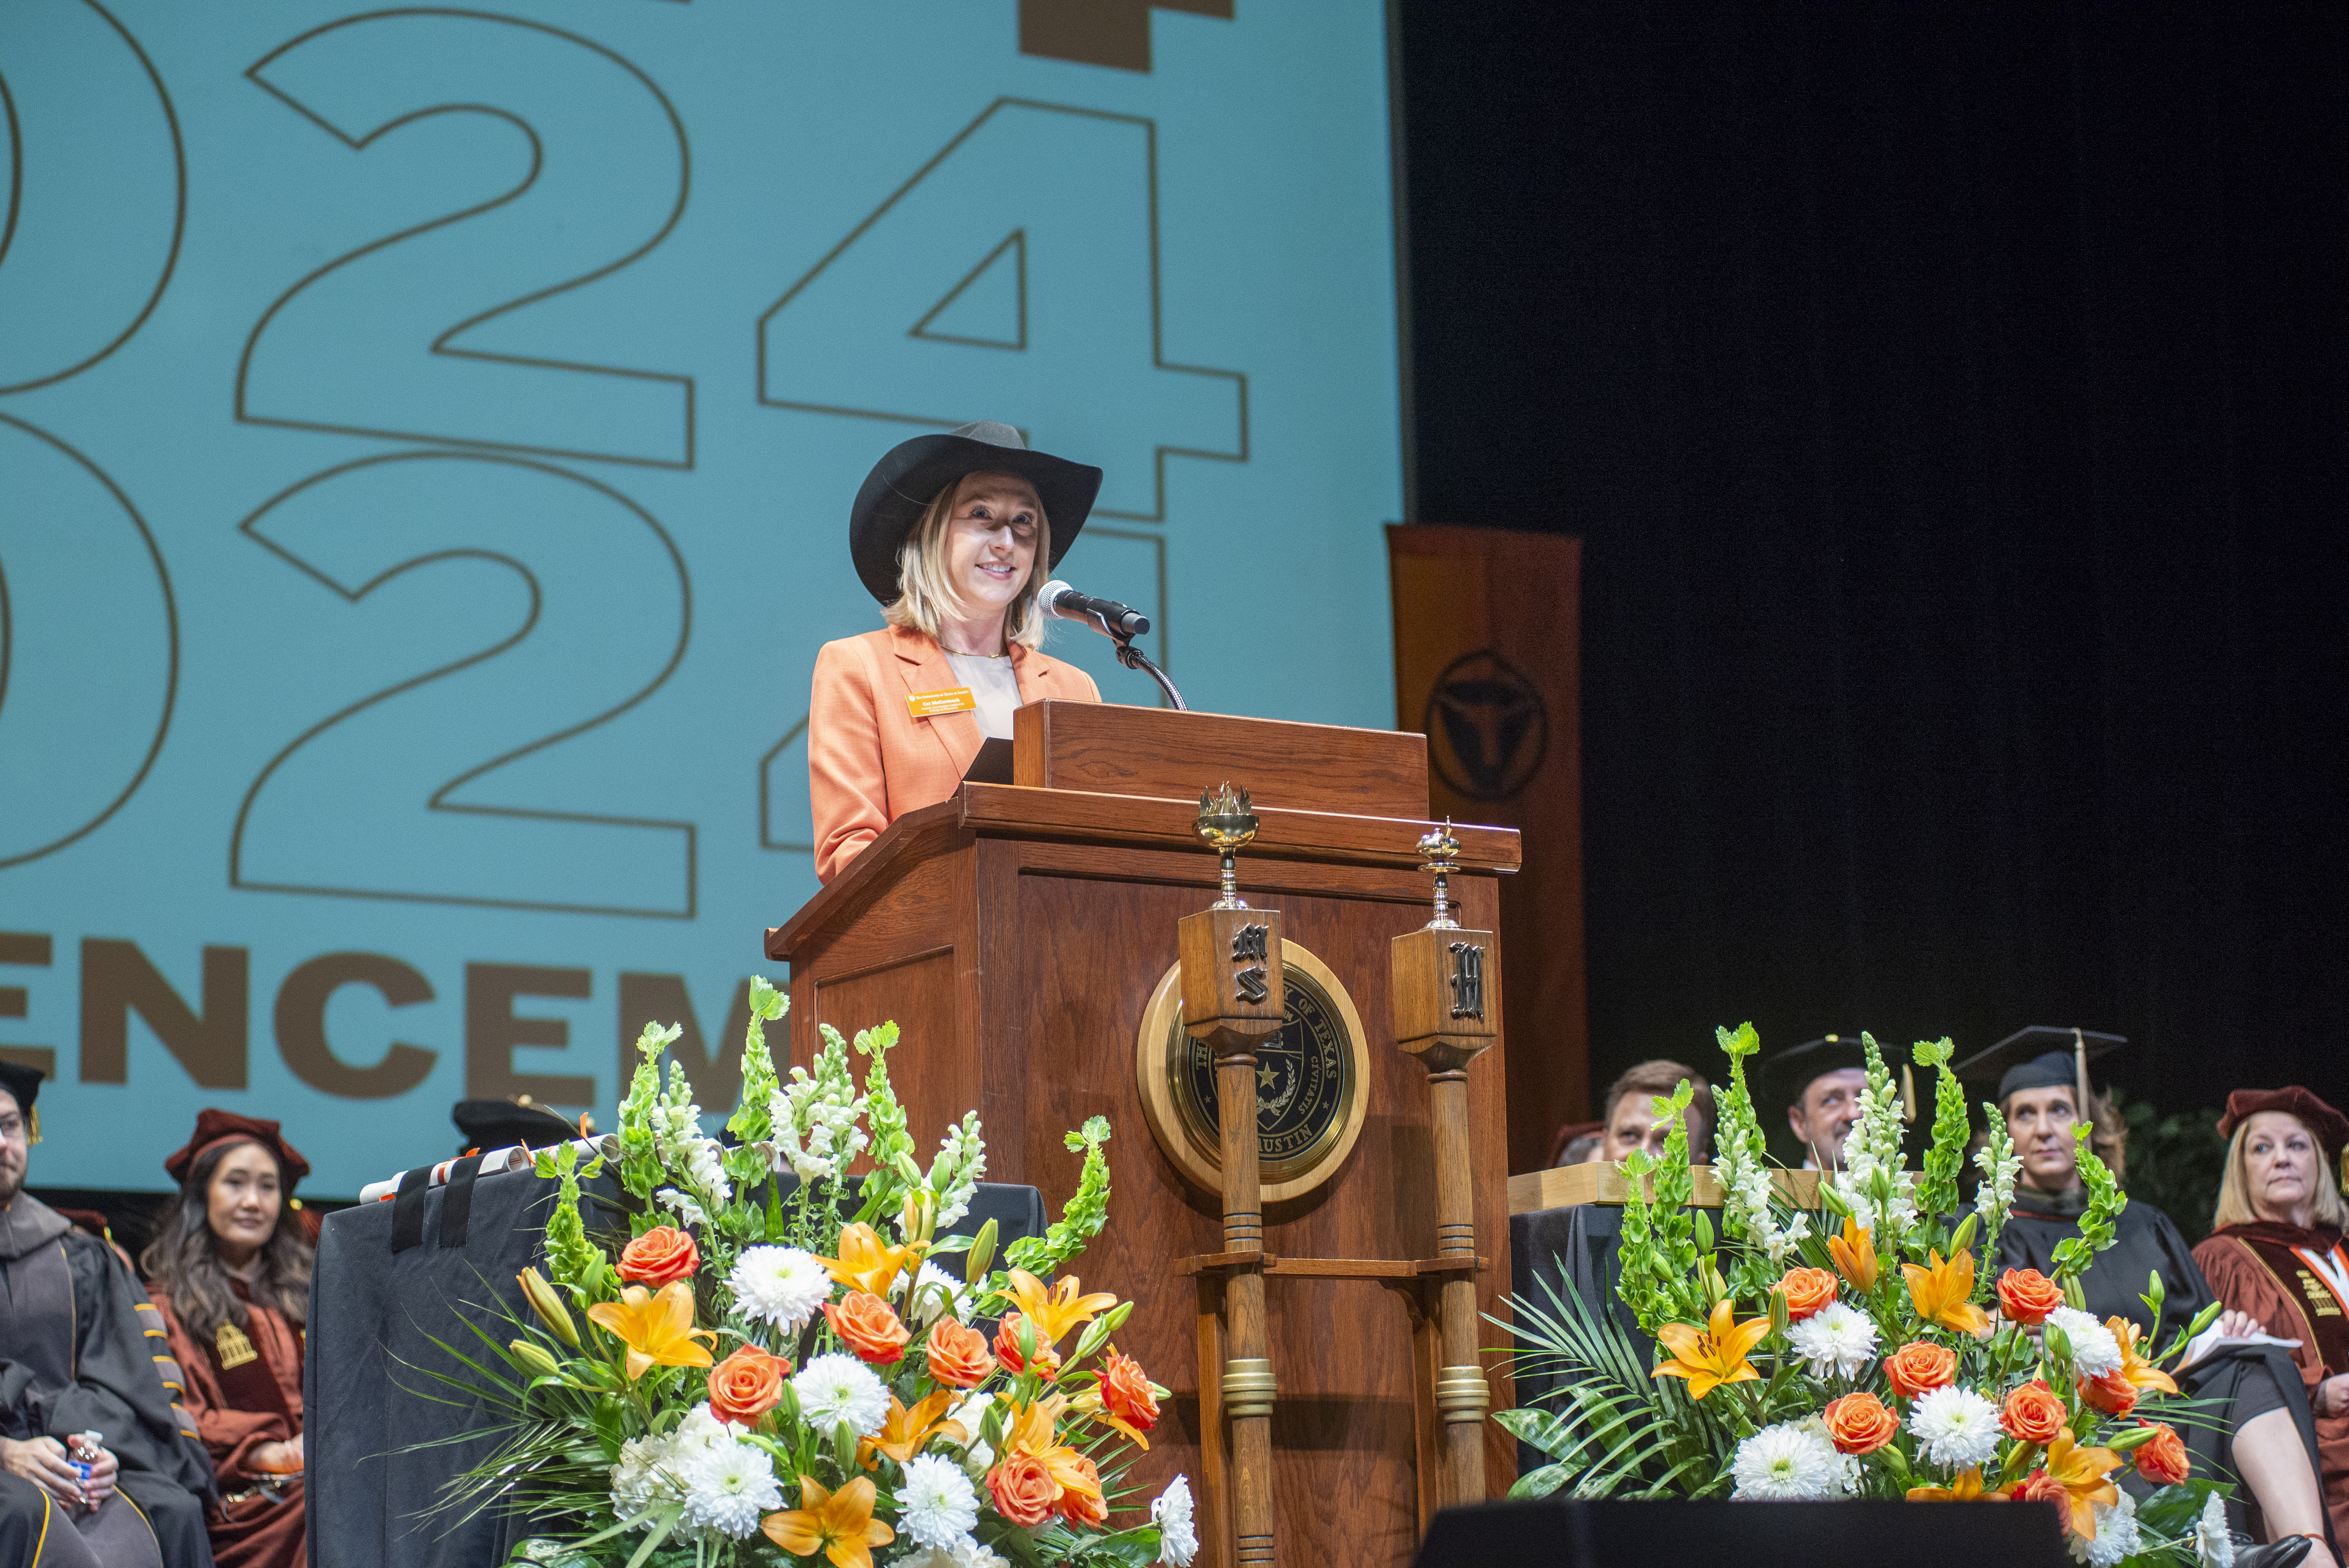 A woman wearing a cowboy hat and a burnt orange suit.